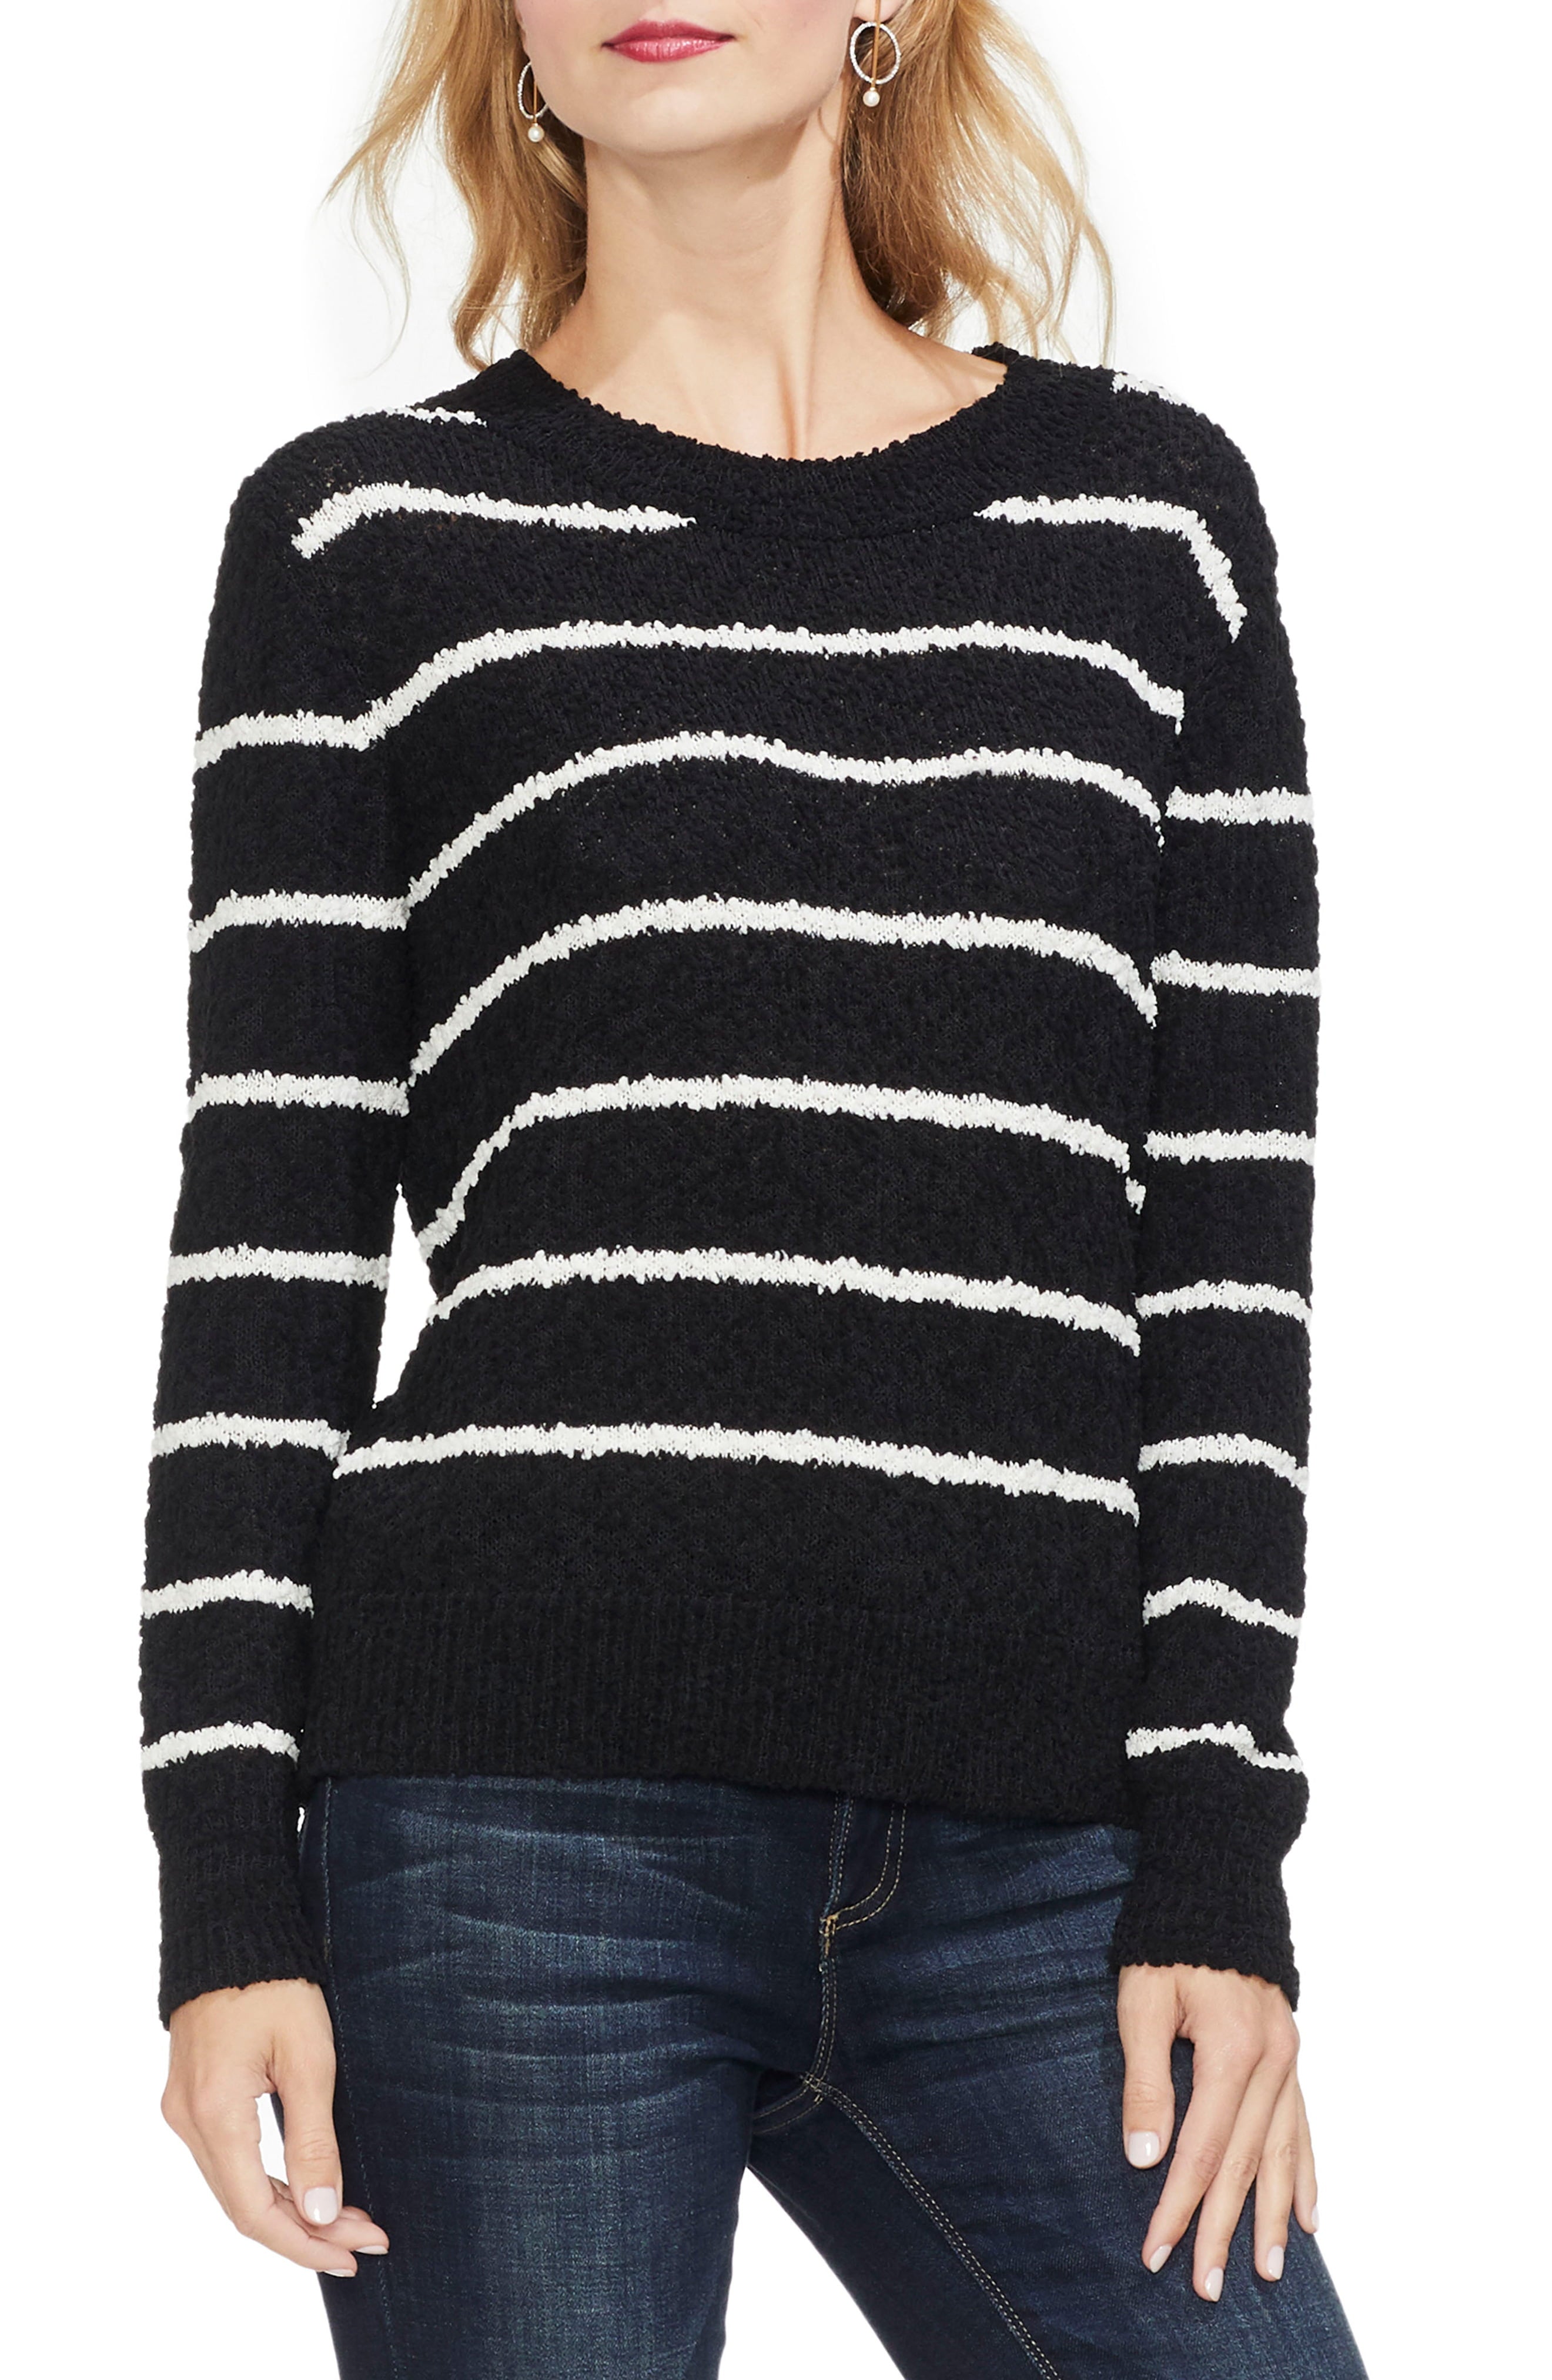 Vince Camuto Womens Chenille Striped Sweater